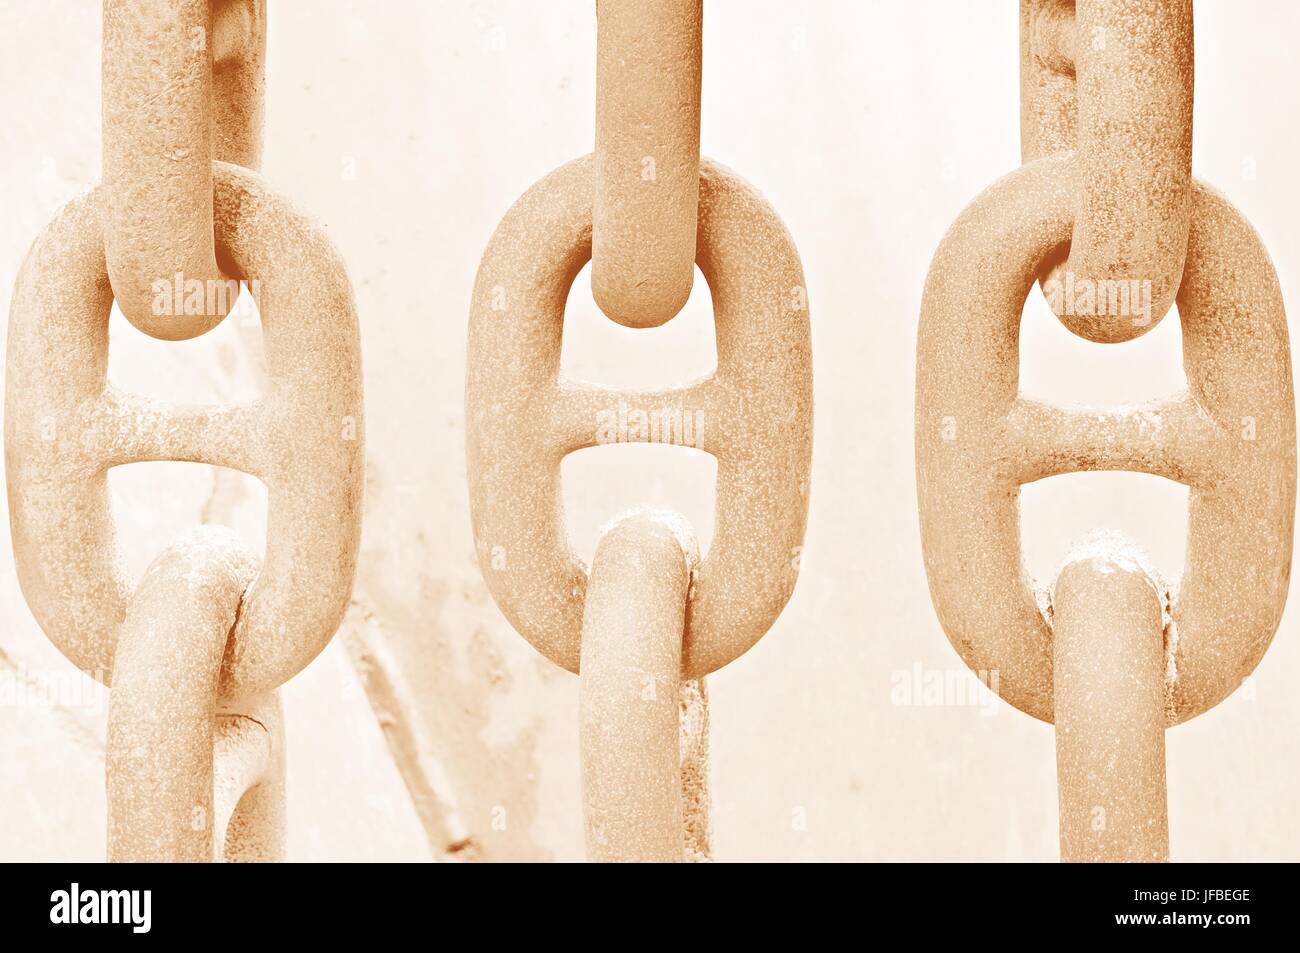 Chains hanging side by side, Stock Photo